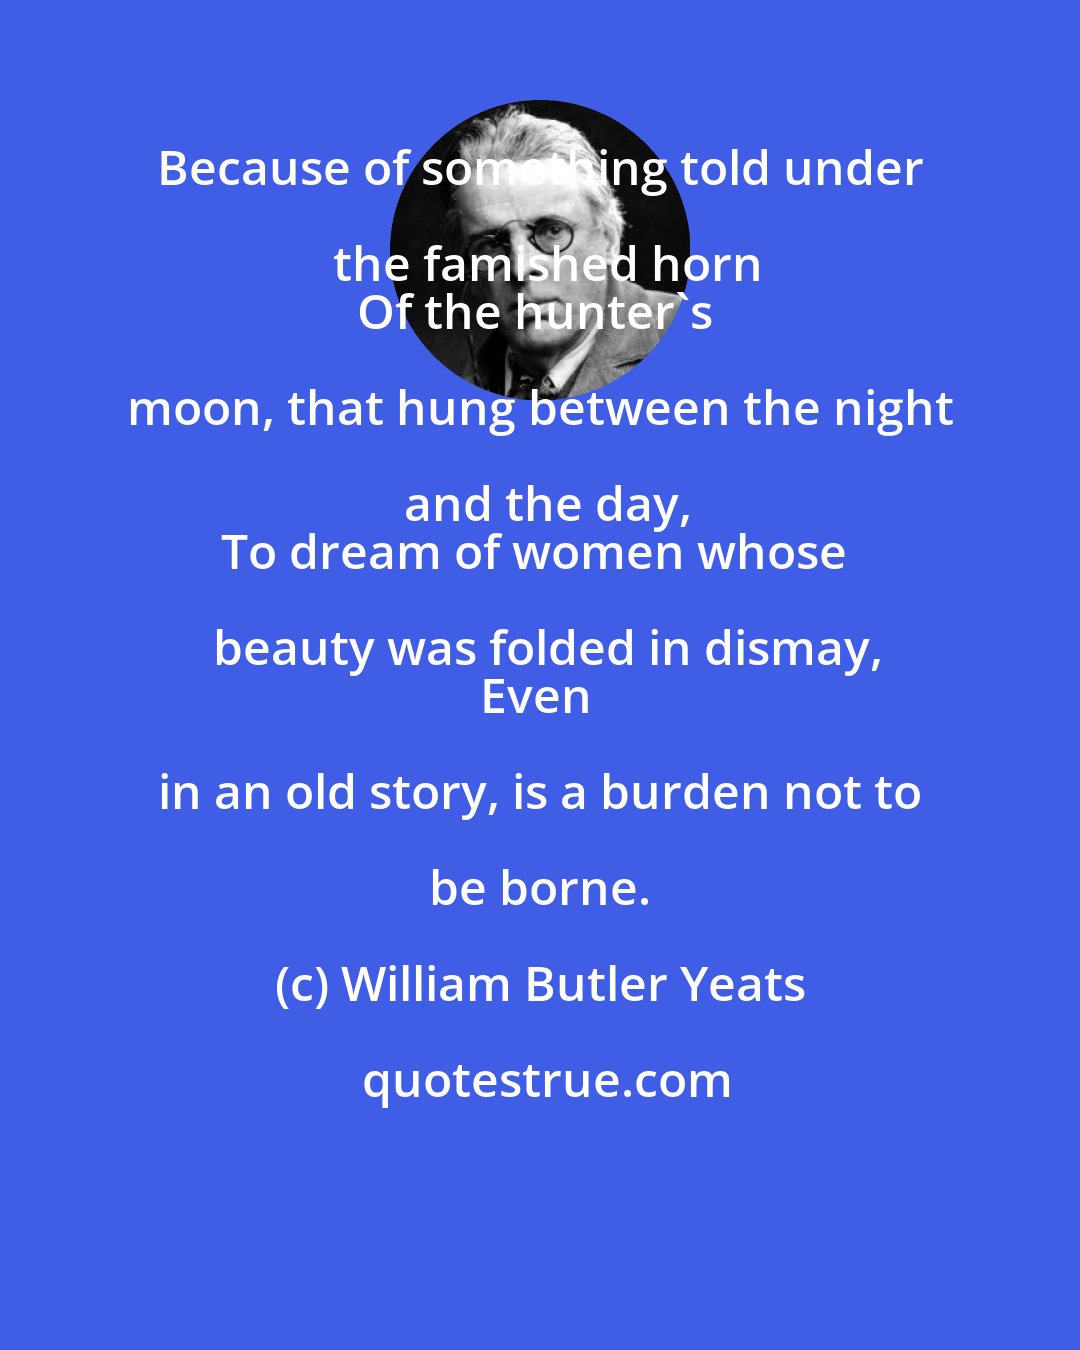 William Butler Yeats: Because of something told under the famished horn
Of the hunter's moon, that hung between the night and the day,
To dream of women whose beauty was folded in dismay,
Even in an old story, is a burden not to be borne.